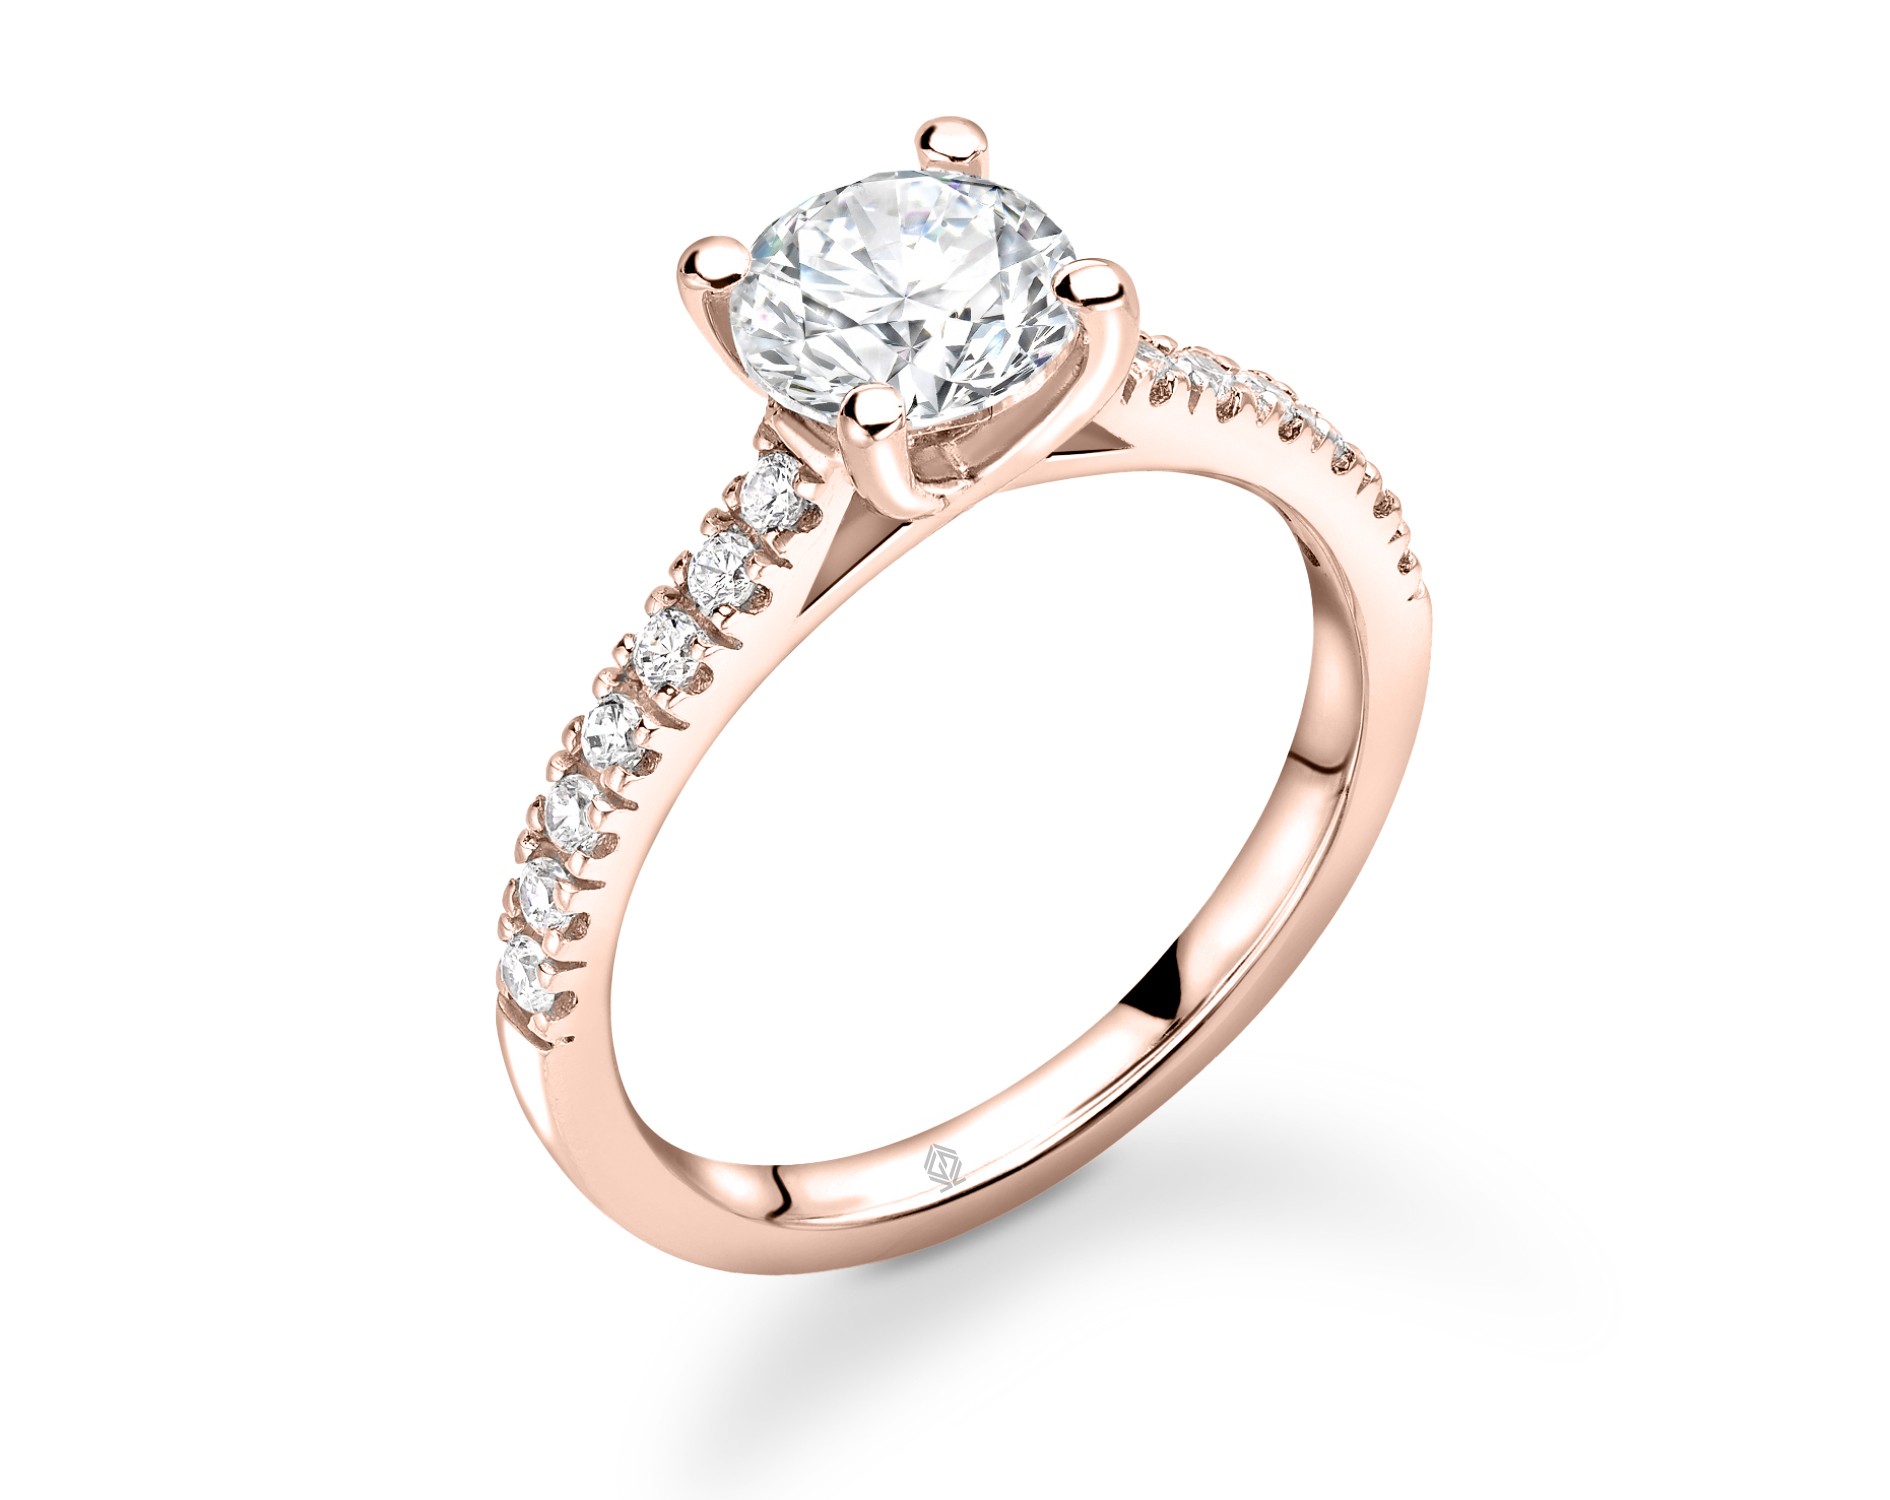 18K ROSE GOLD ROUND CUT 4 PRONGS DIAMOND ENGAGEMENT RING WITH SIDE STONES PAVE SET